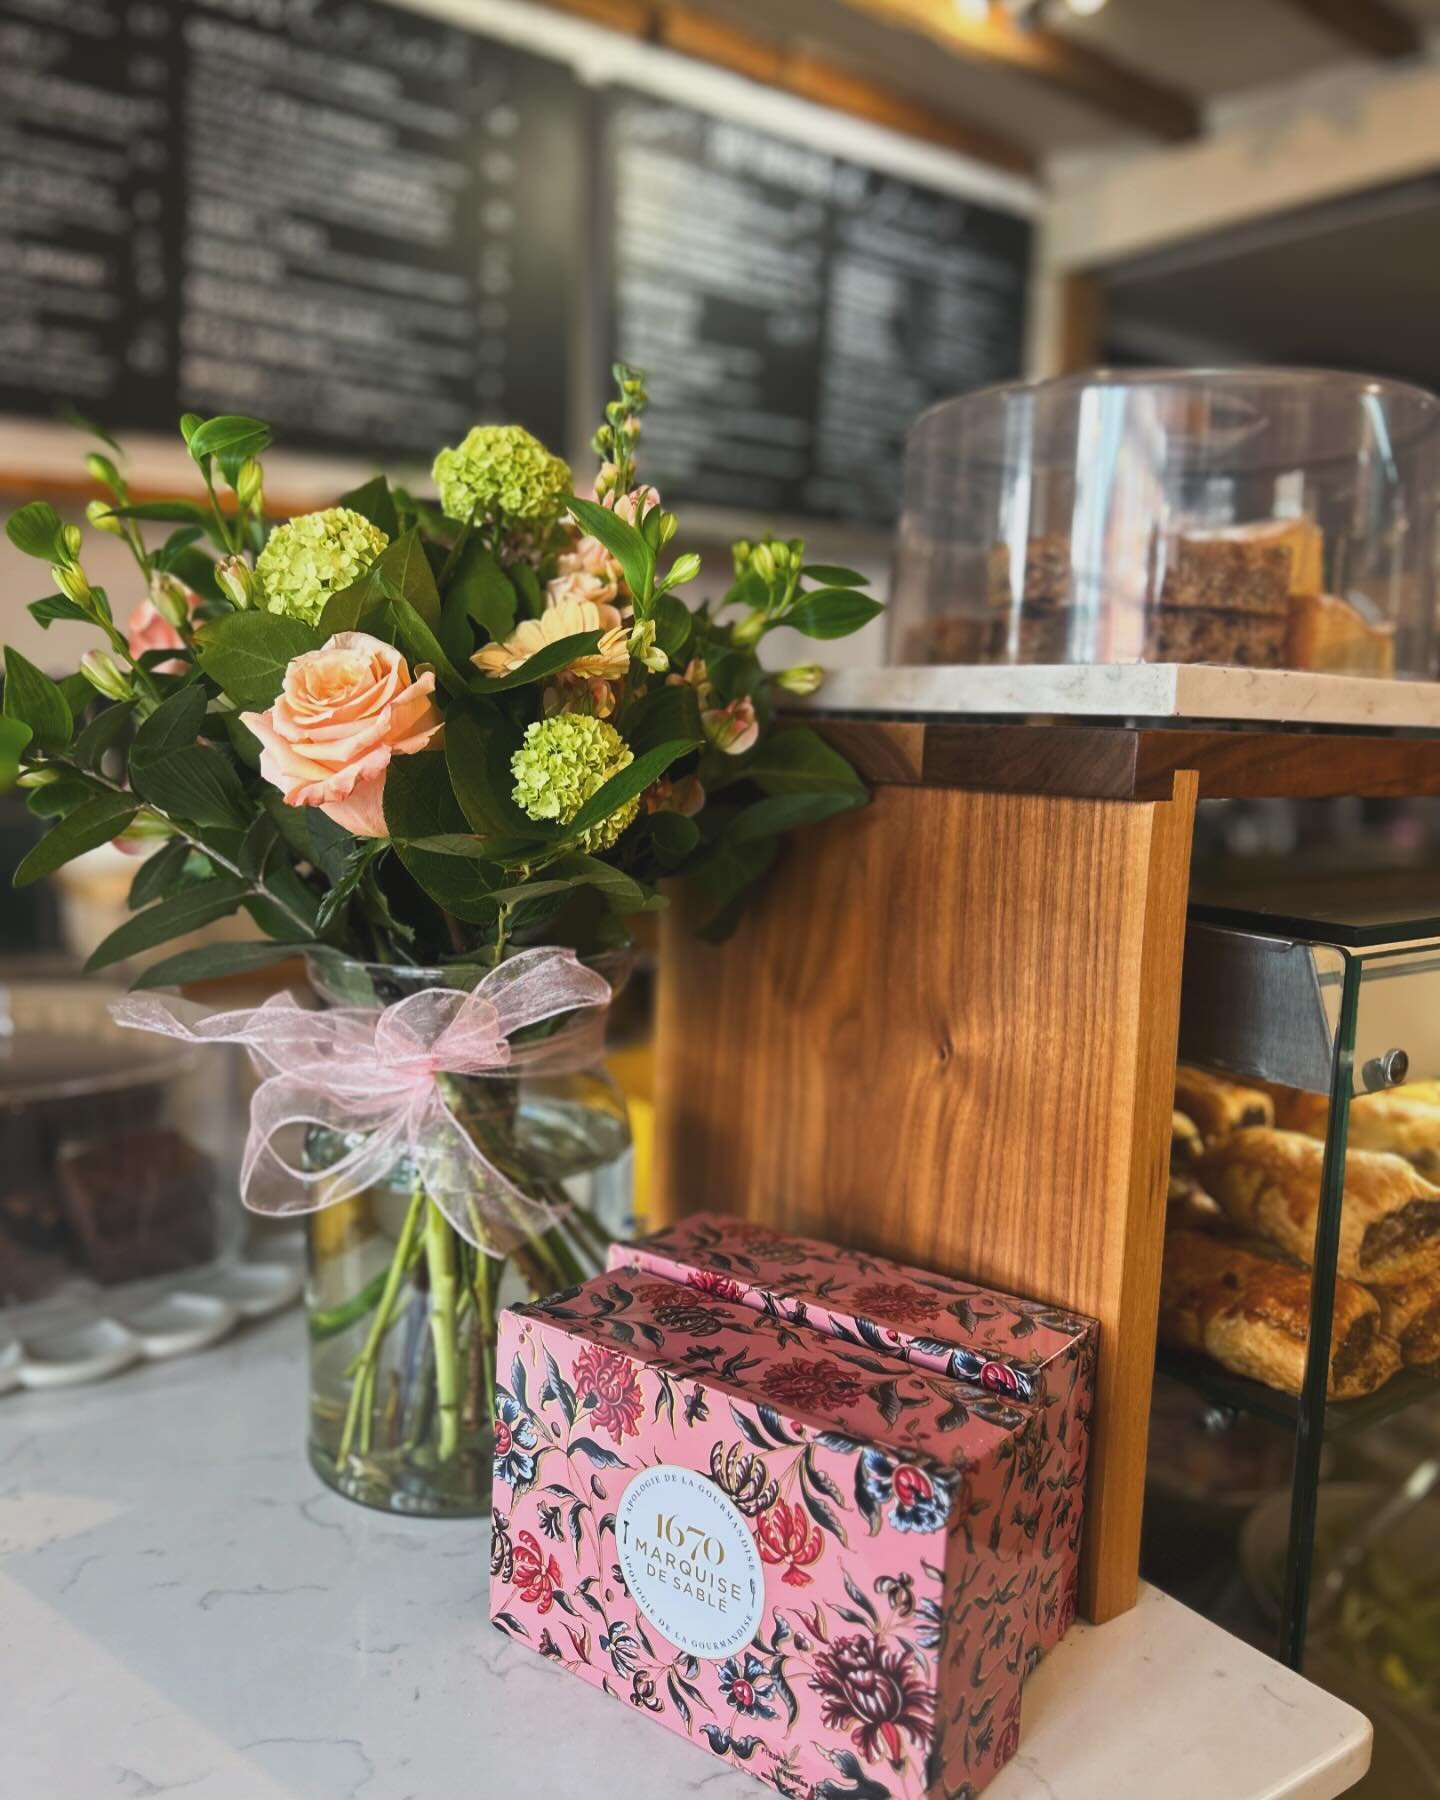 Weekly Flowers for The Deli - we offer a free vase filing service for businesses and for homes, weekly or fortnightly 🌸

Message us for more information 🌸